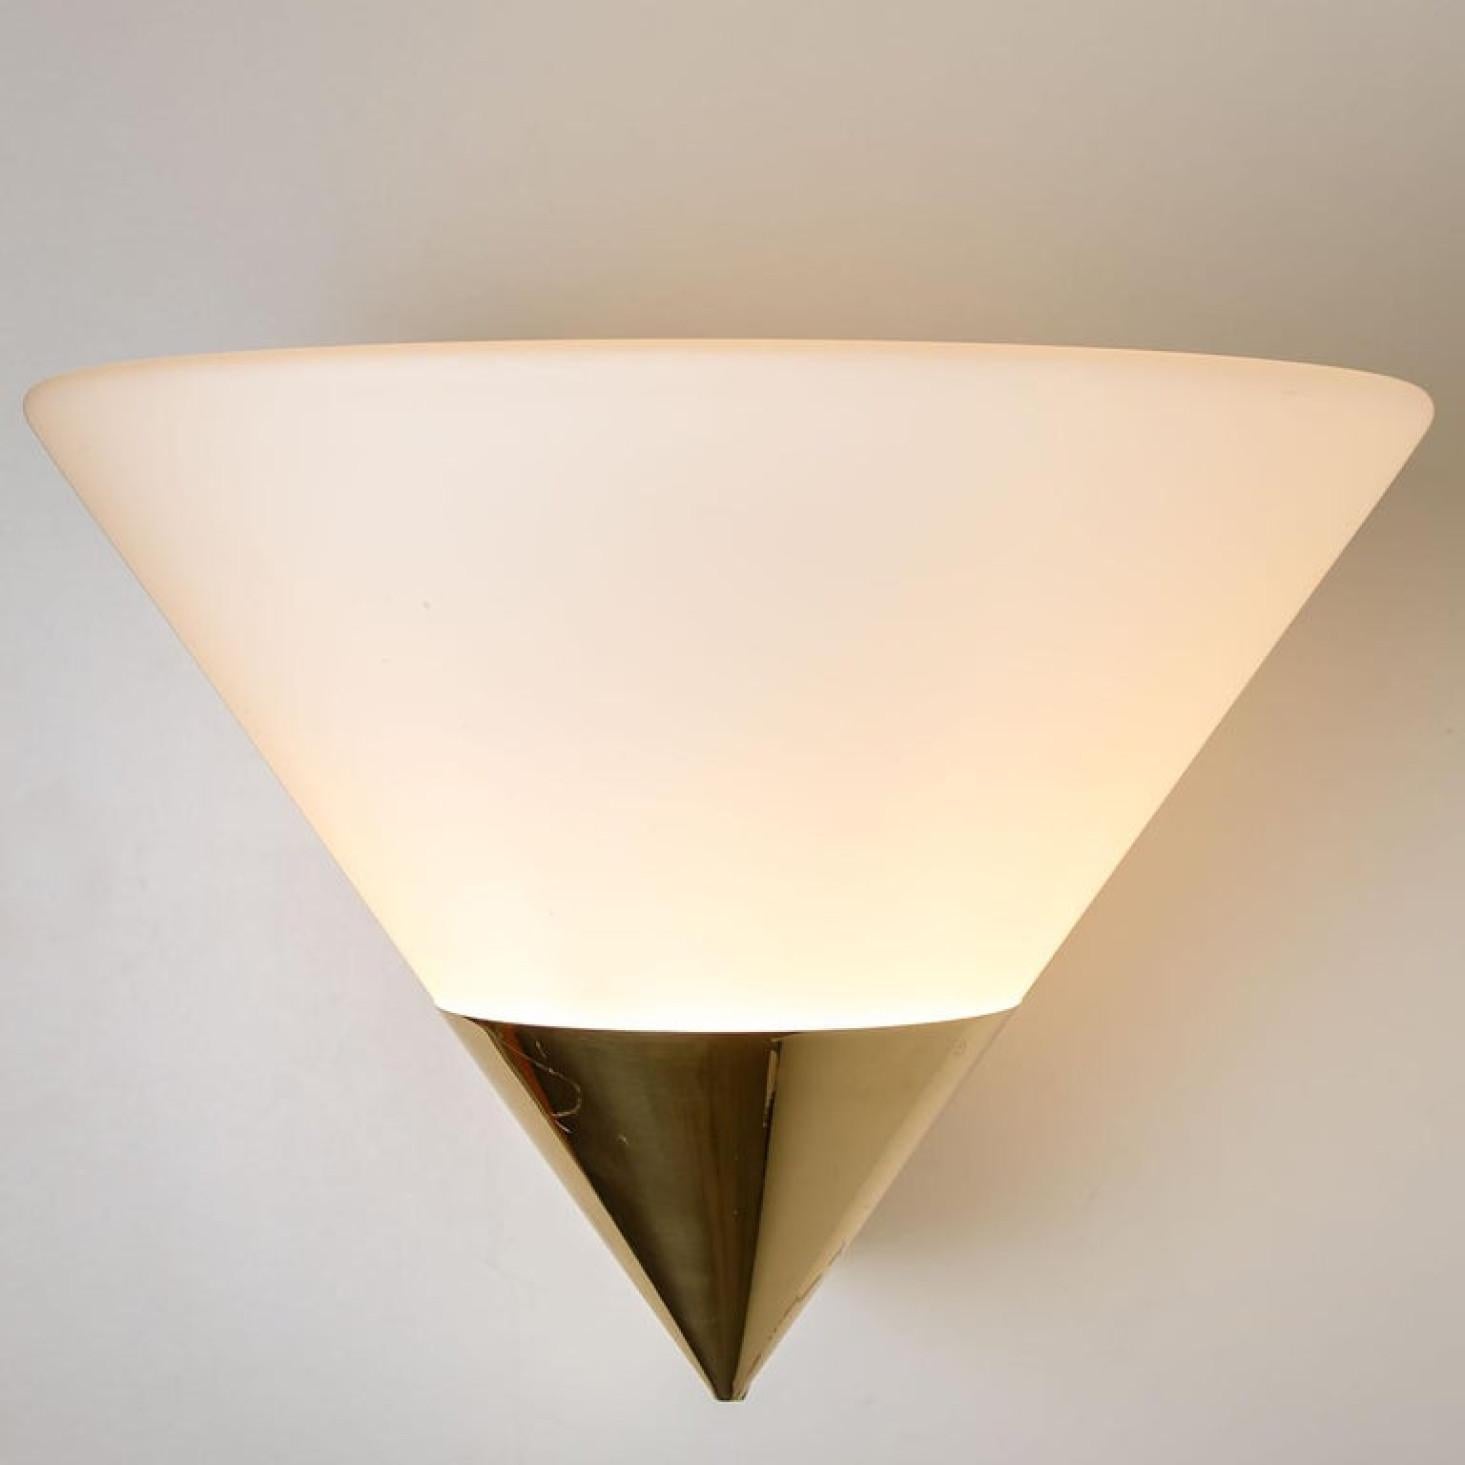 1 of the 4 Pairs Large Modern Wall Lamps by Glashütte Limburg, 1970 For Sale 6